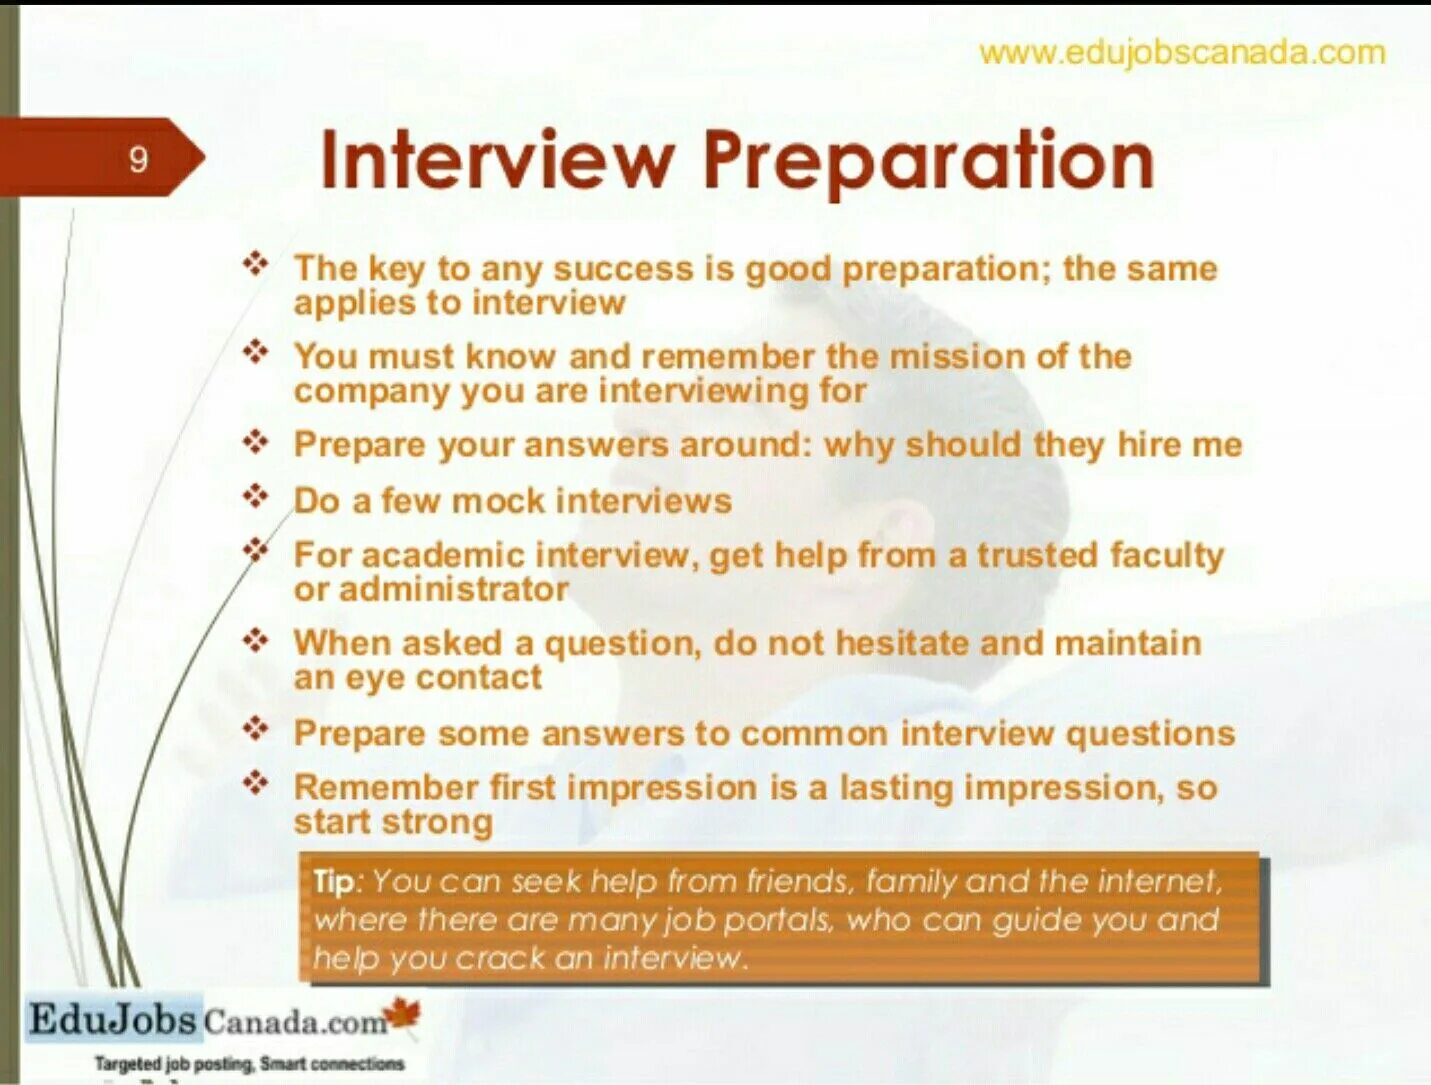 How to prepare for a job Interview. How to prepare for an Interview. Job Interview preparation. Урок 27 preparation for a job подготовка к трудоустройству.